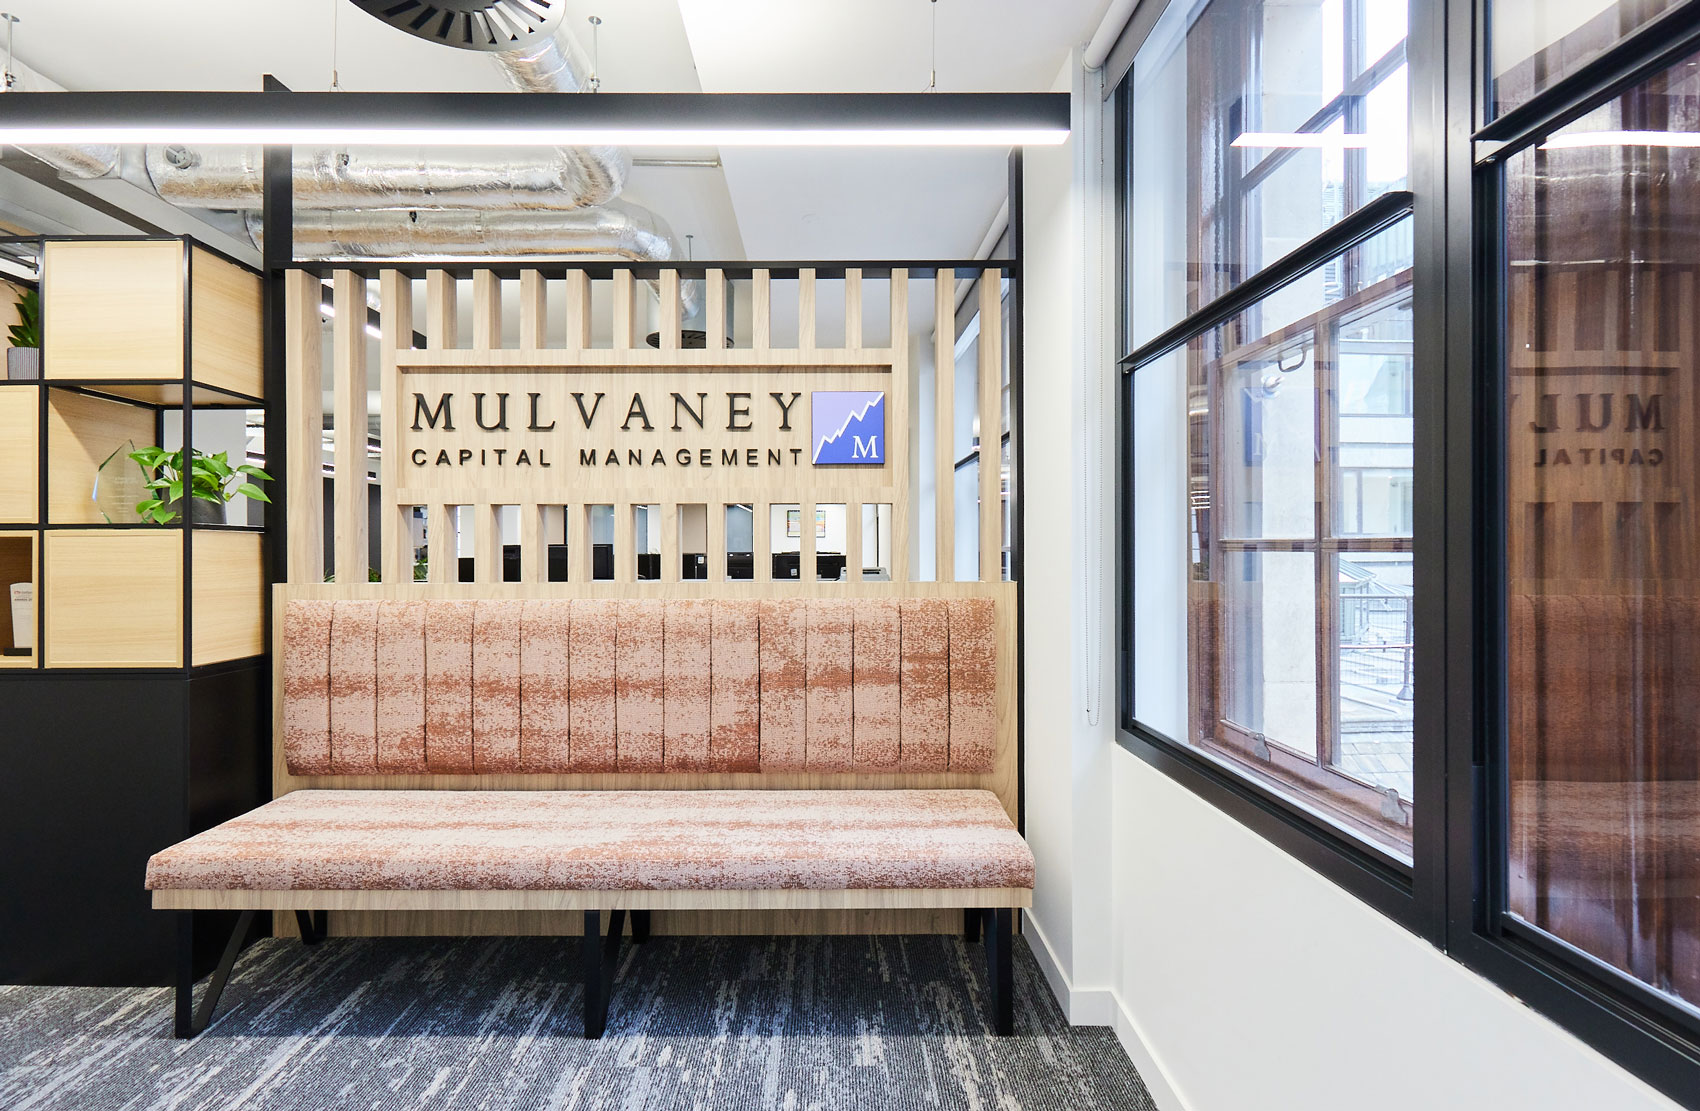 Company logo atop bespoke joinery in a contemporary office reception area